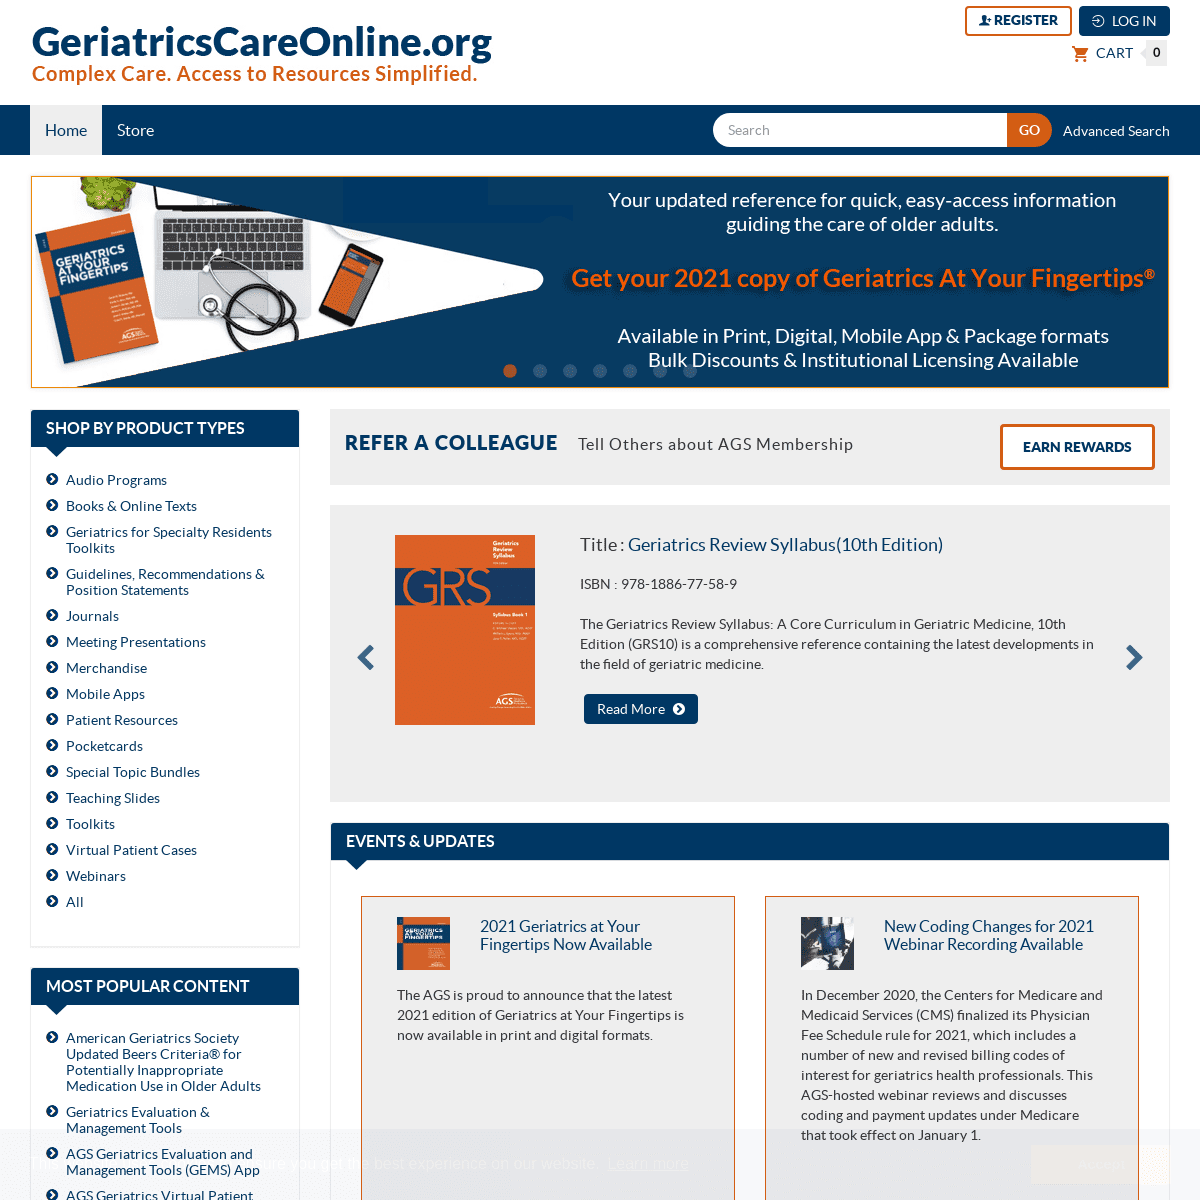 A complete backup of https://geriatricscareonline.org